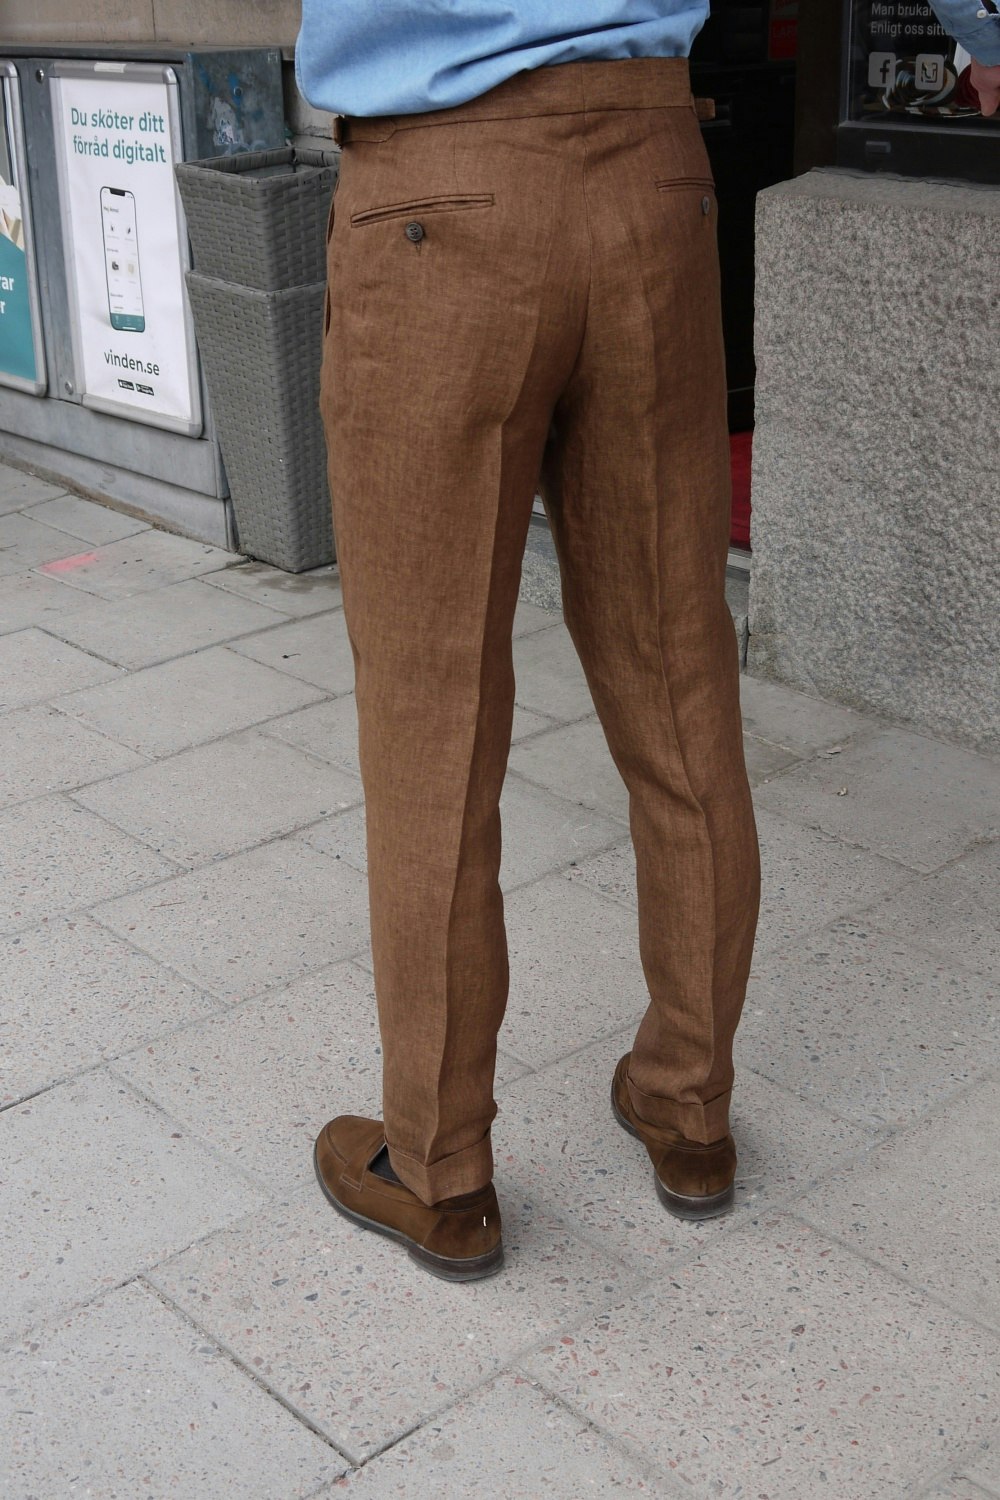 Solid Linen Trousers - High Waist - Mid Brown